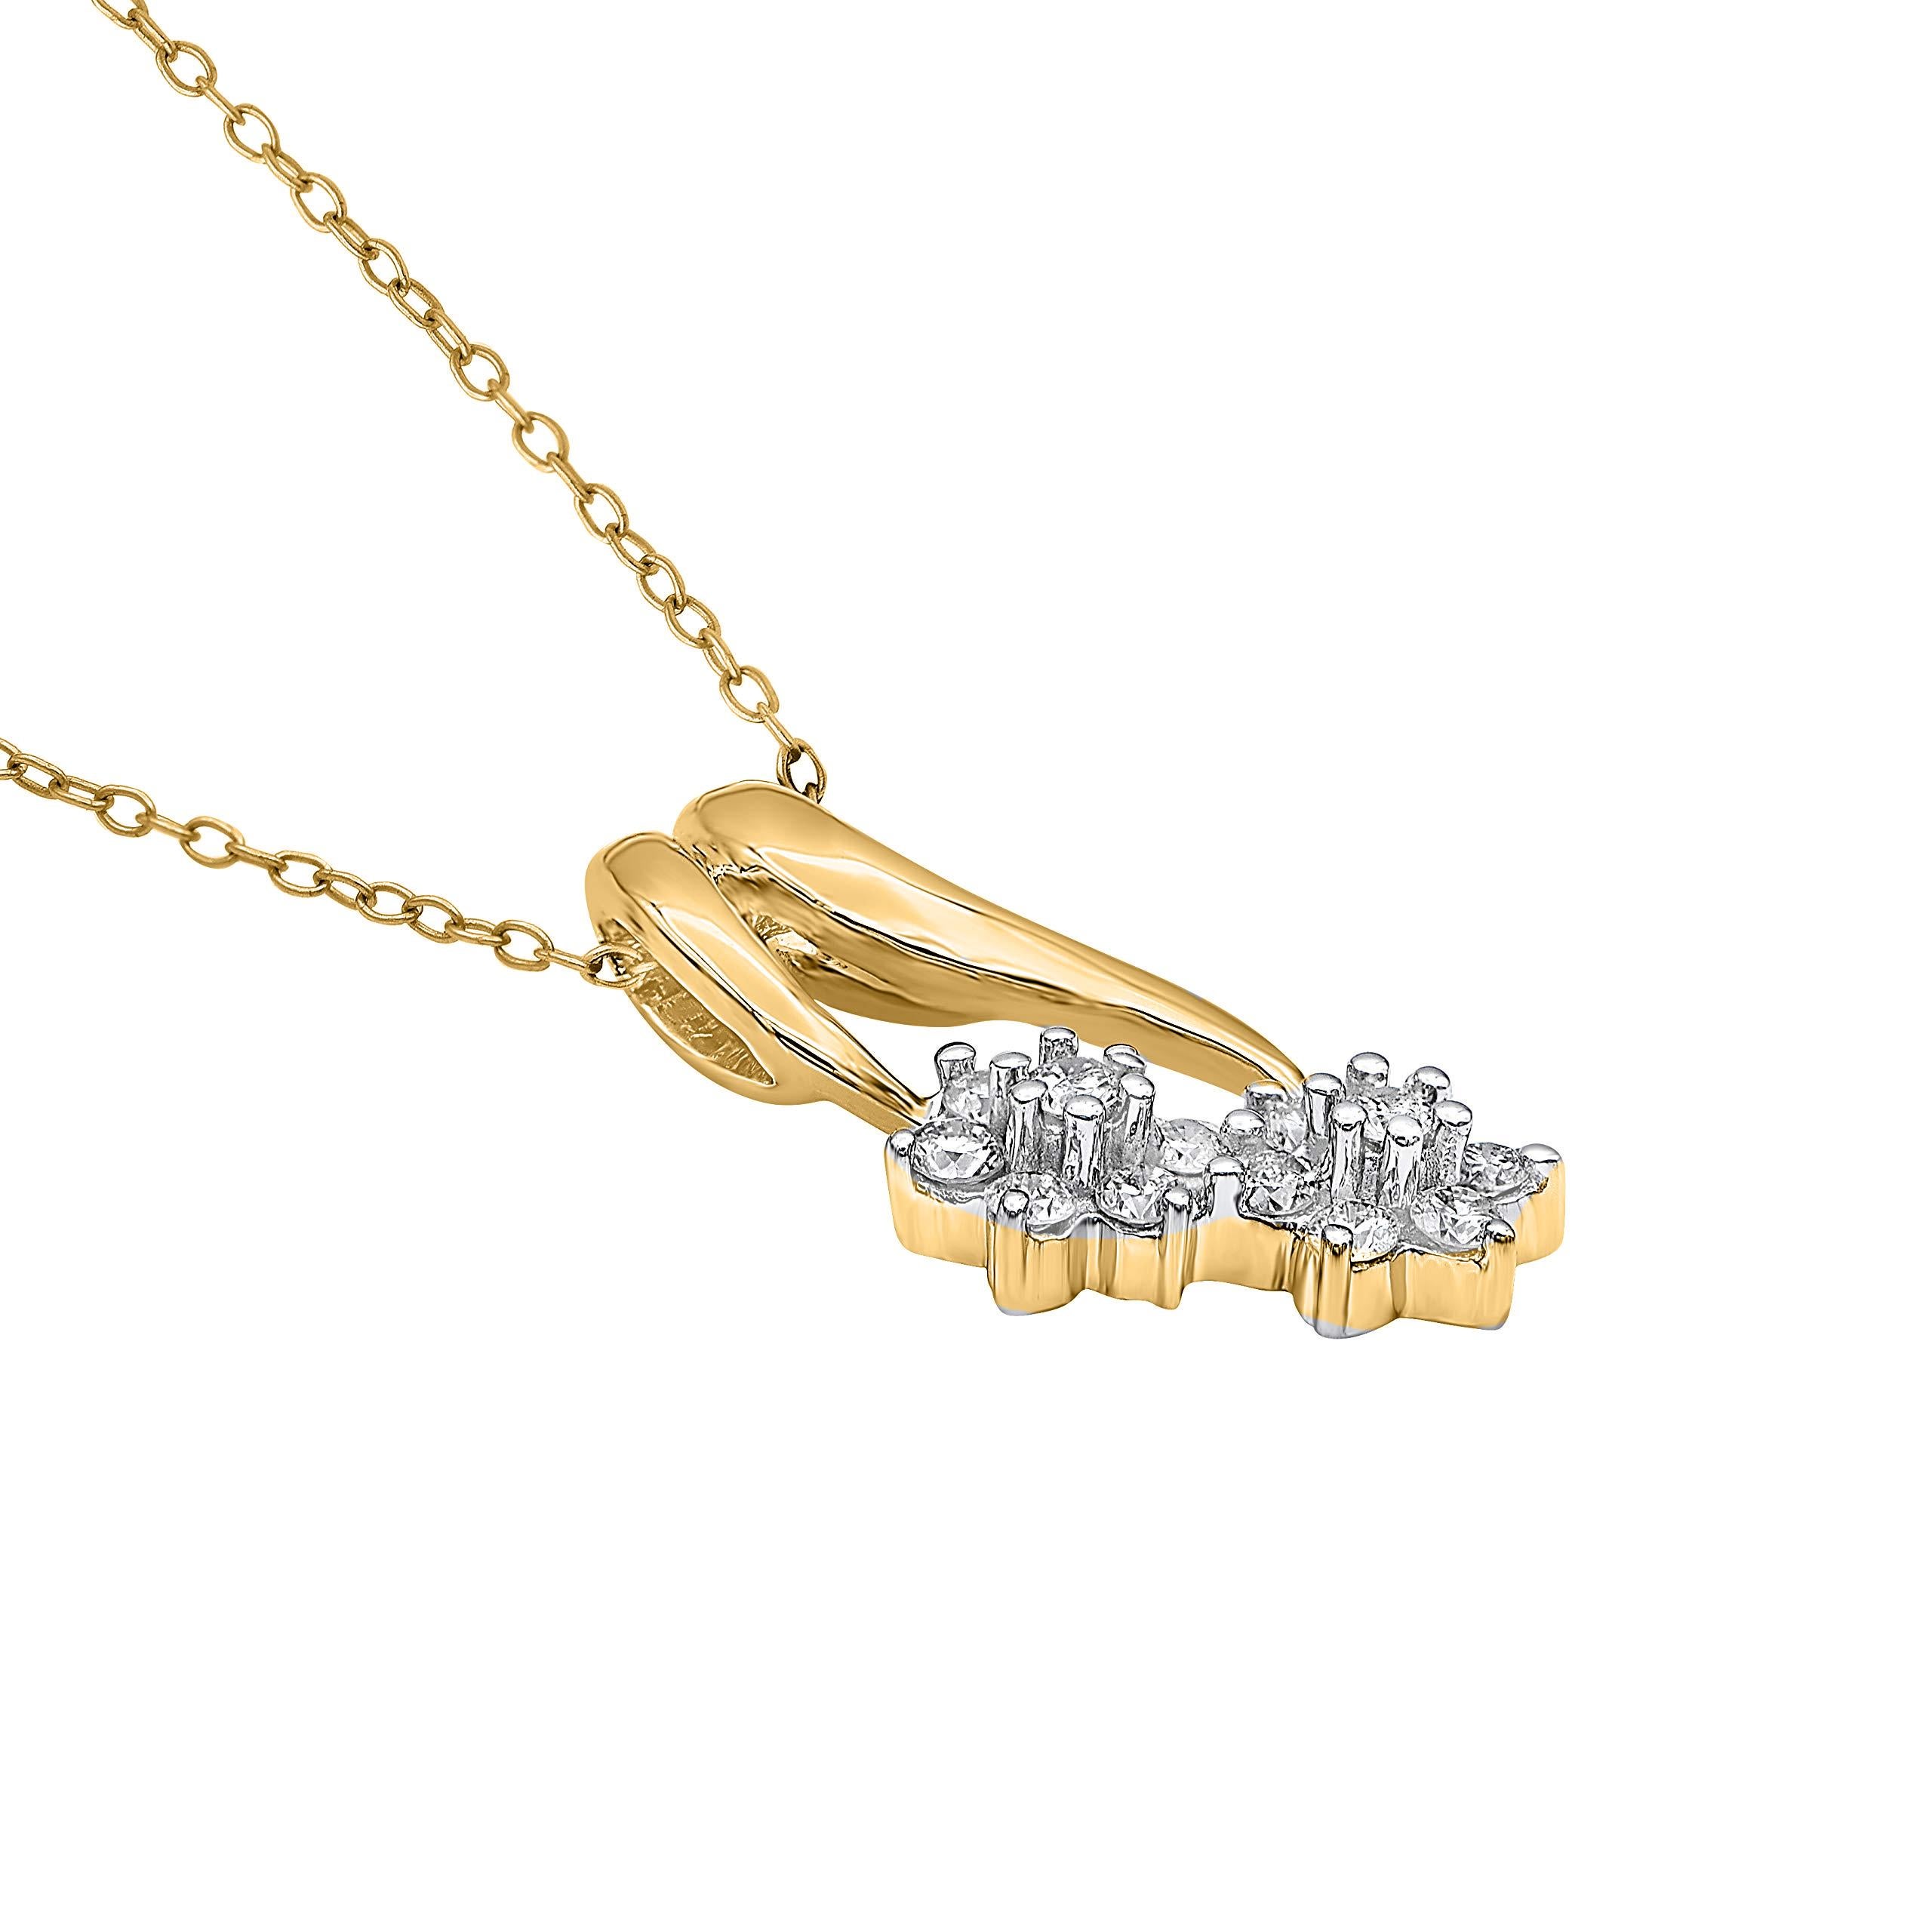 Bring charm to your look with this diamond pendant. The pendant is crafted from 14-karat yellow gold and features 14 round brilliant cut diamonds in prong set. H-I color I2 clarity and a high polish finish complete the brilliant sophistication of